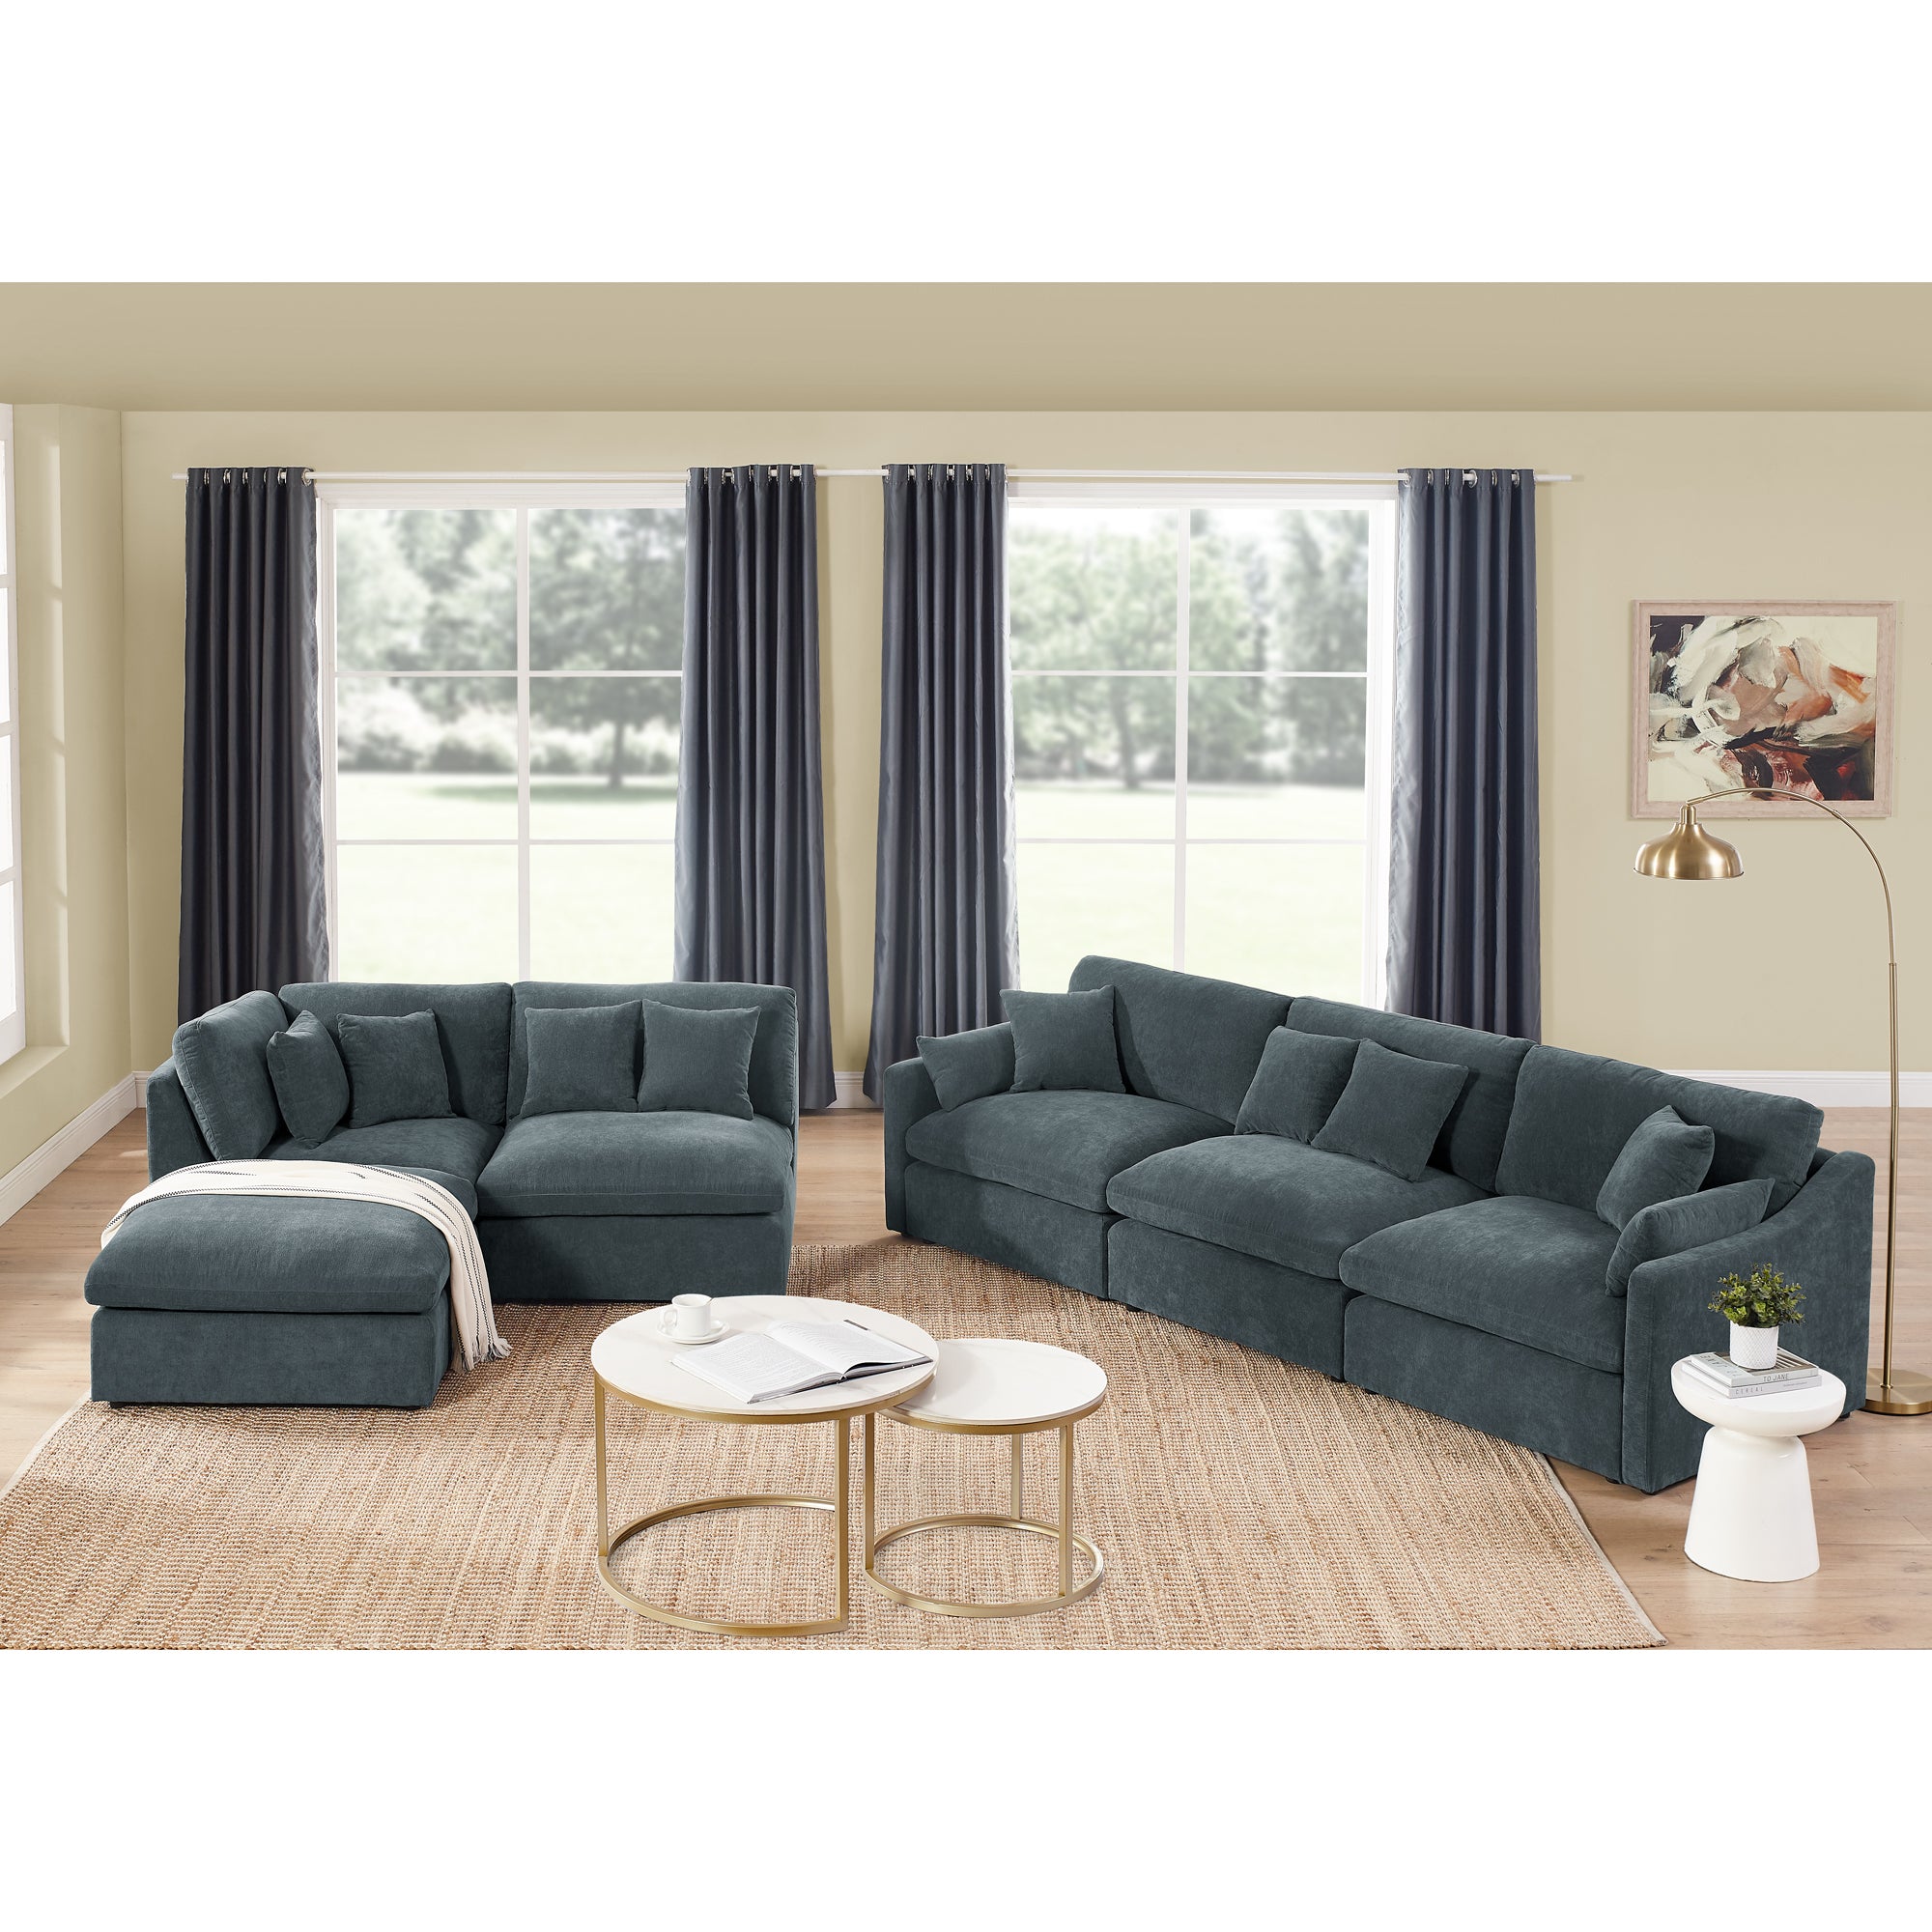 6 Seats Modular L Shaped Sectional Sofa with dark grey-chenille-wood-primary living